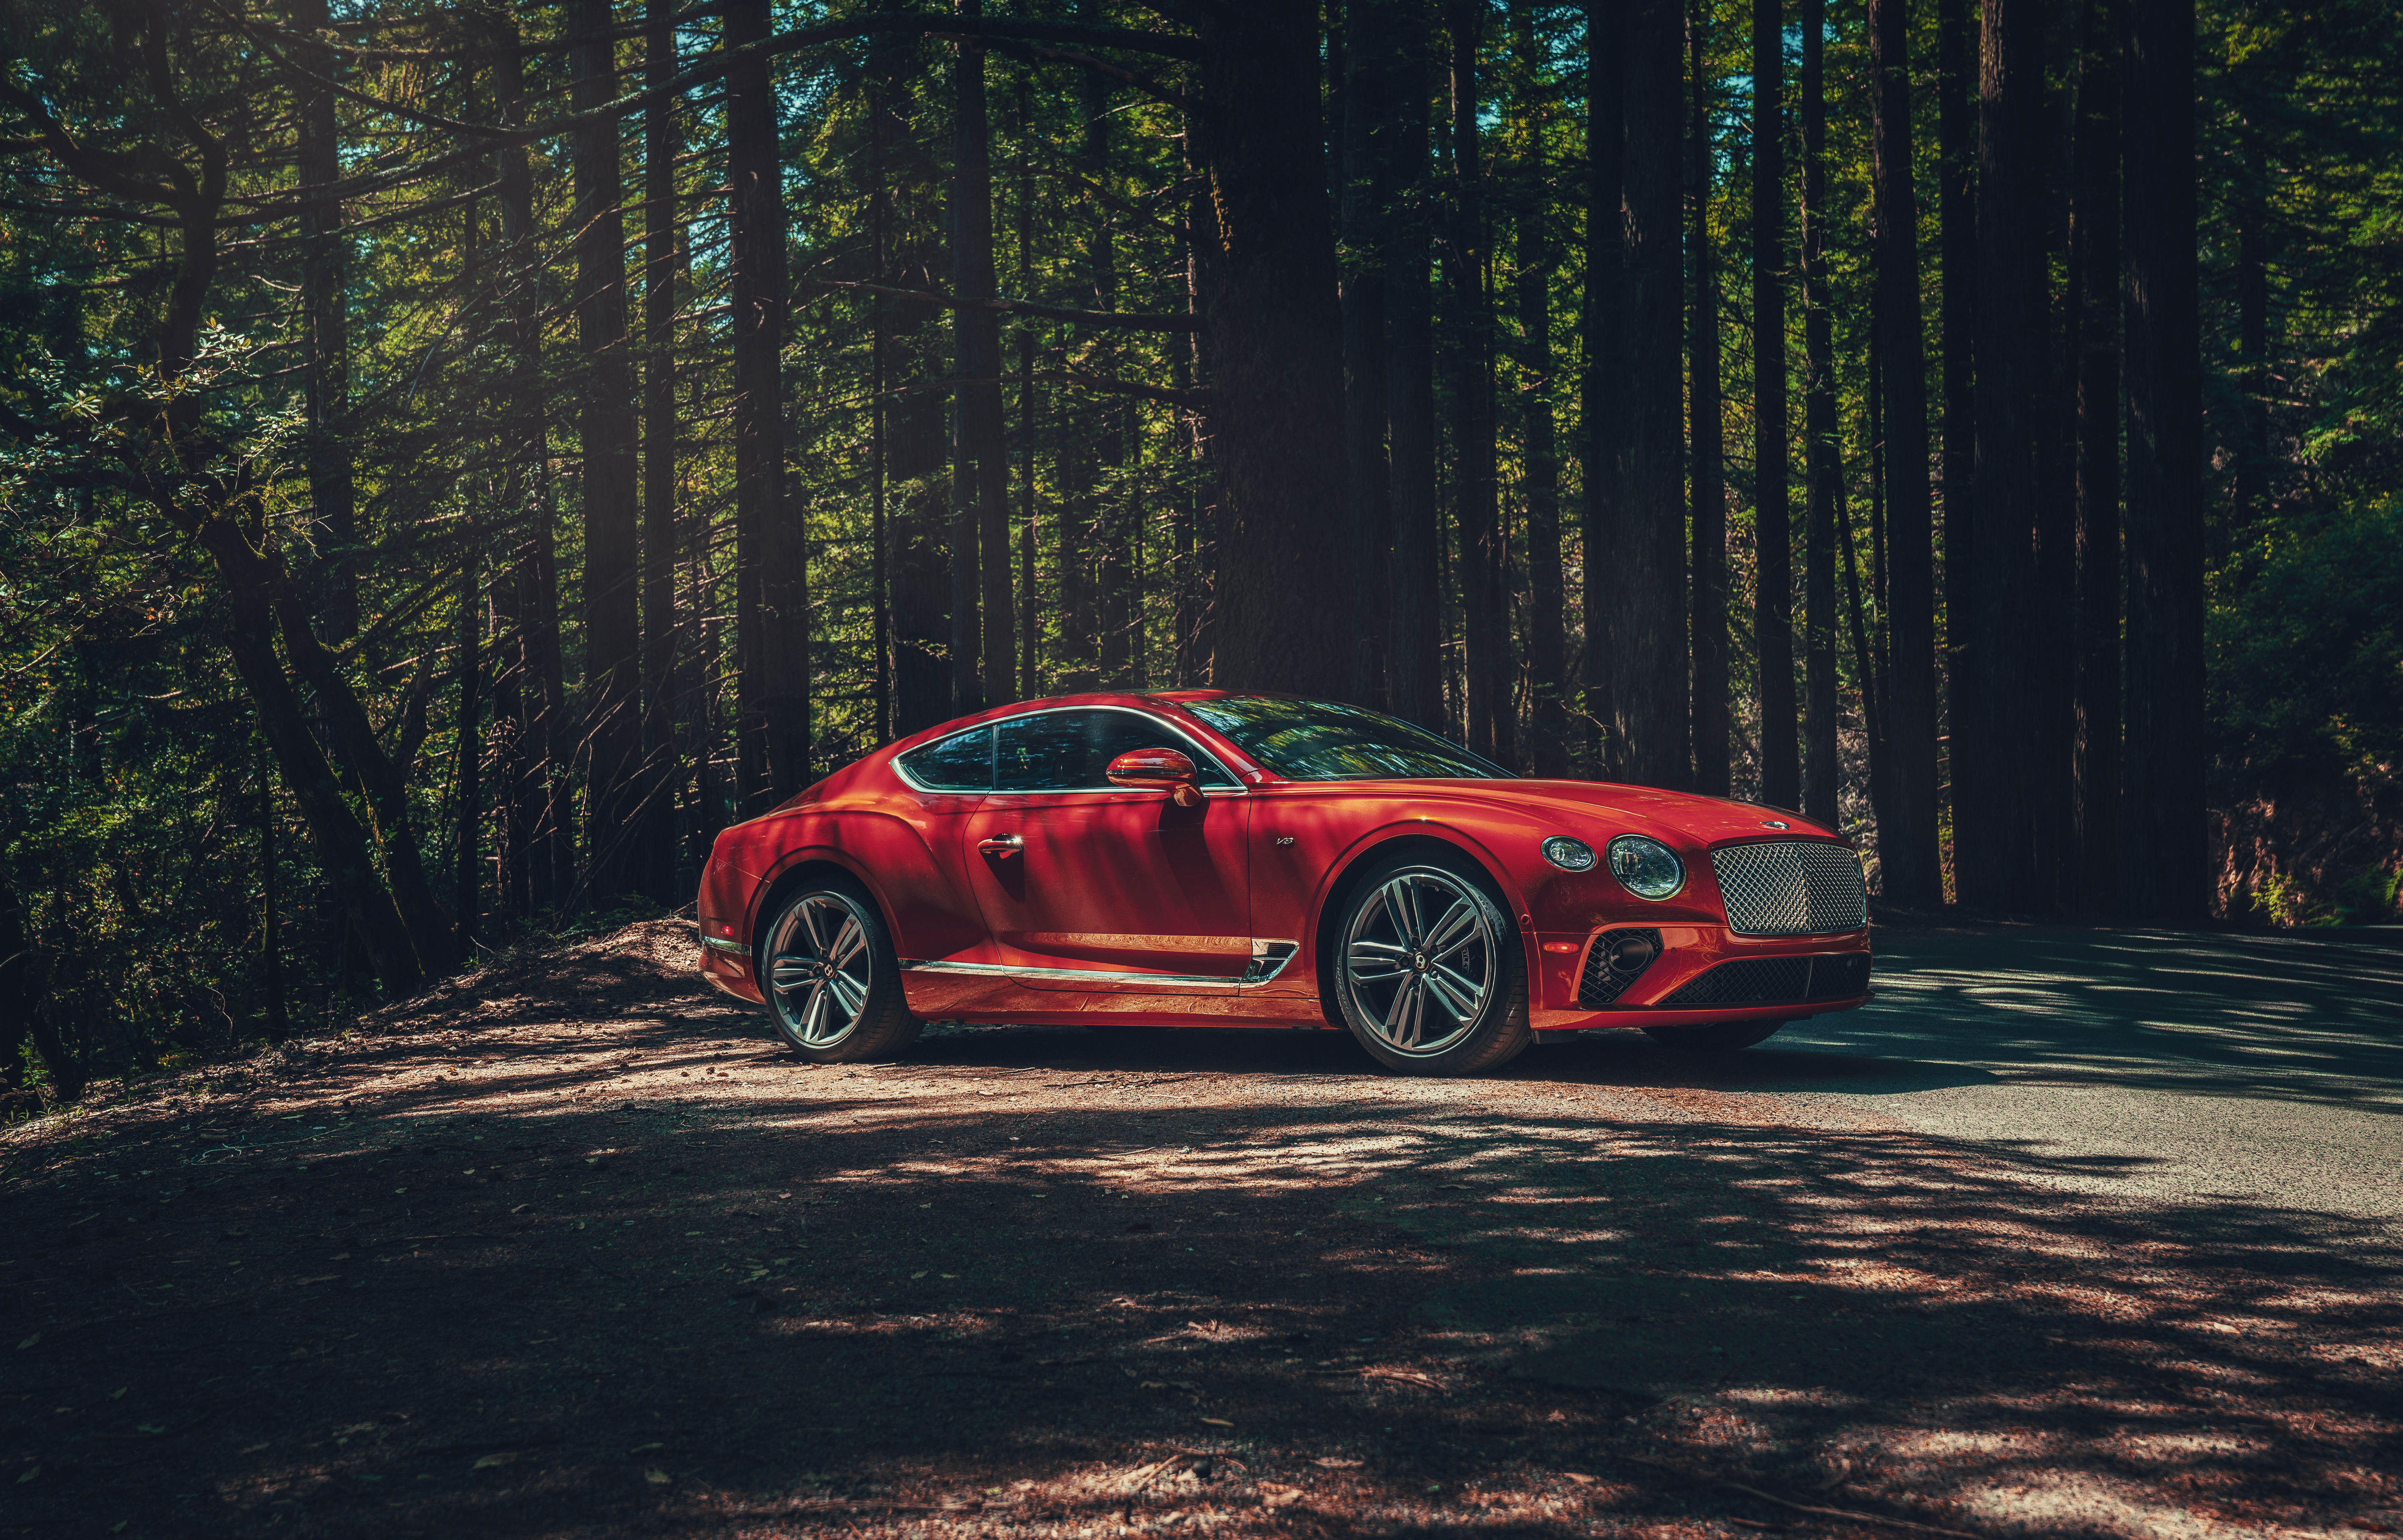 The 2020 Bentley Continental GT in red among the conifers